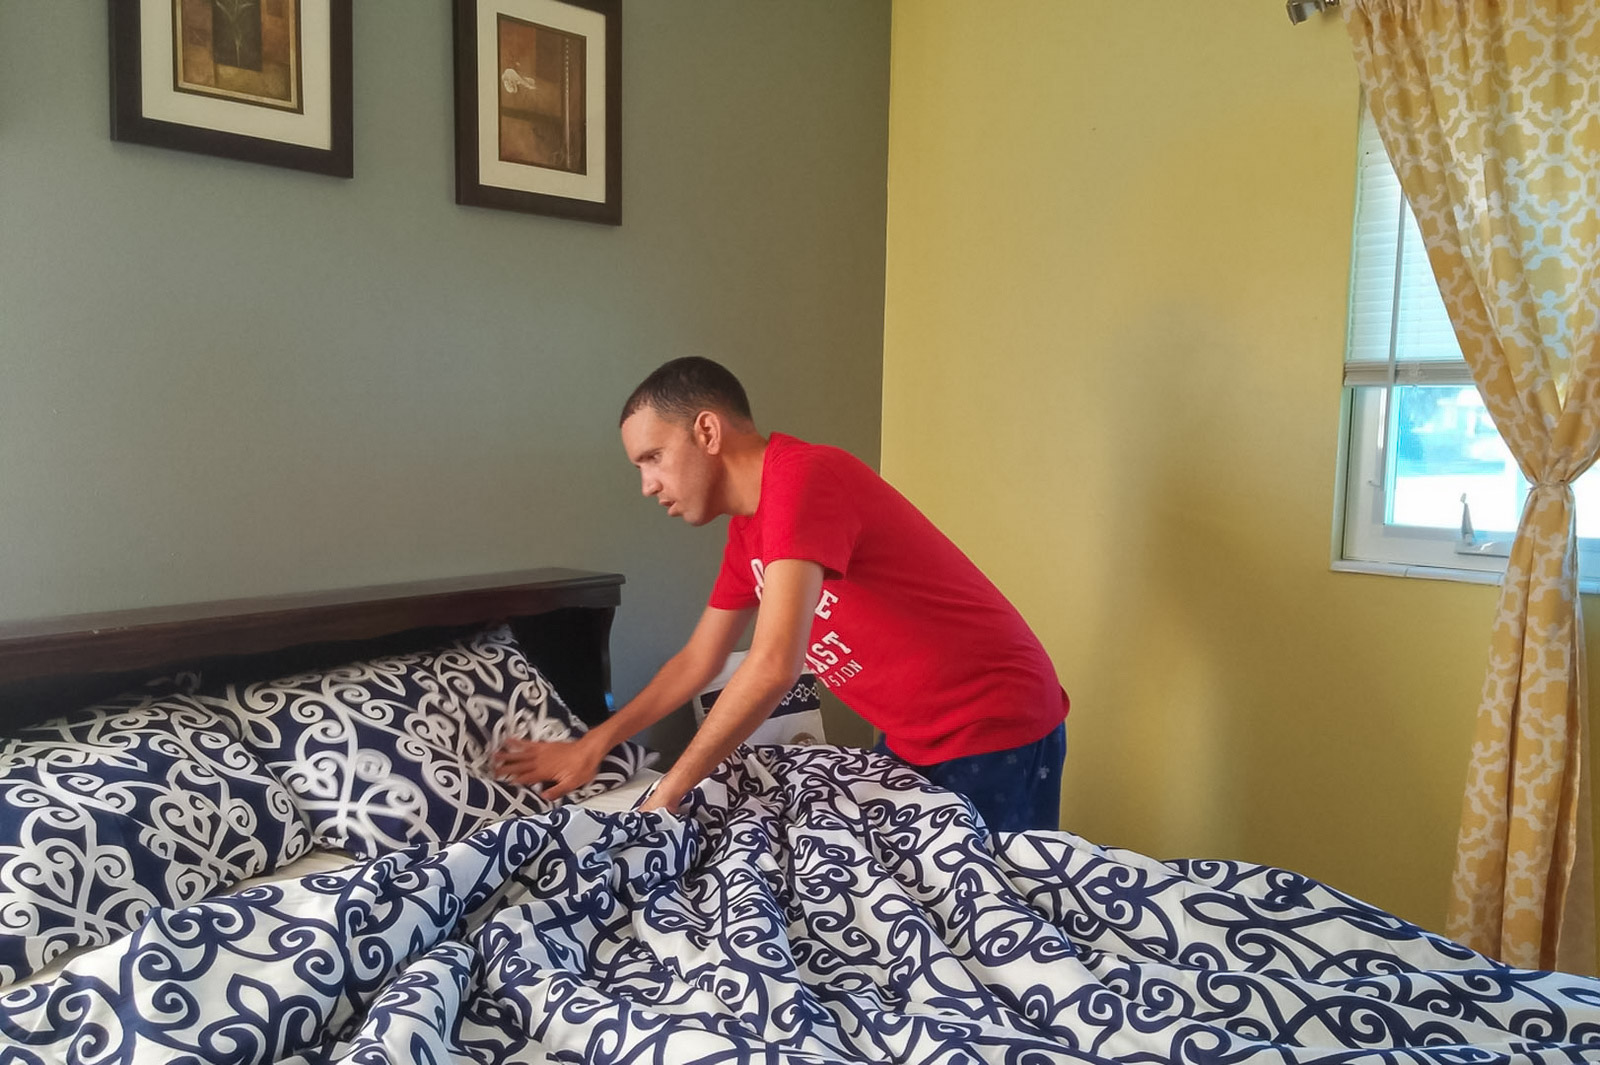 Group home resident learning how to make his bed.